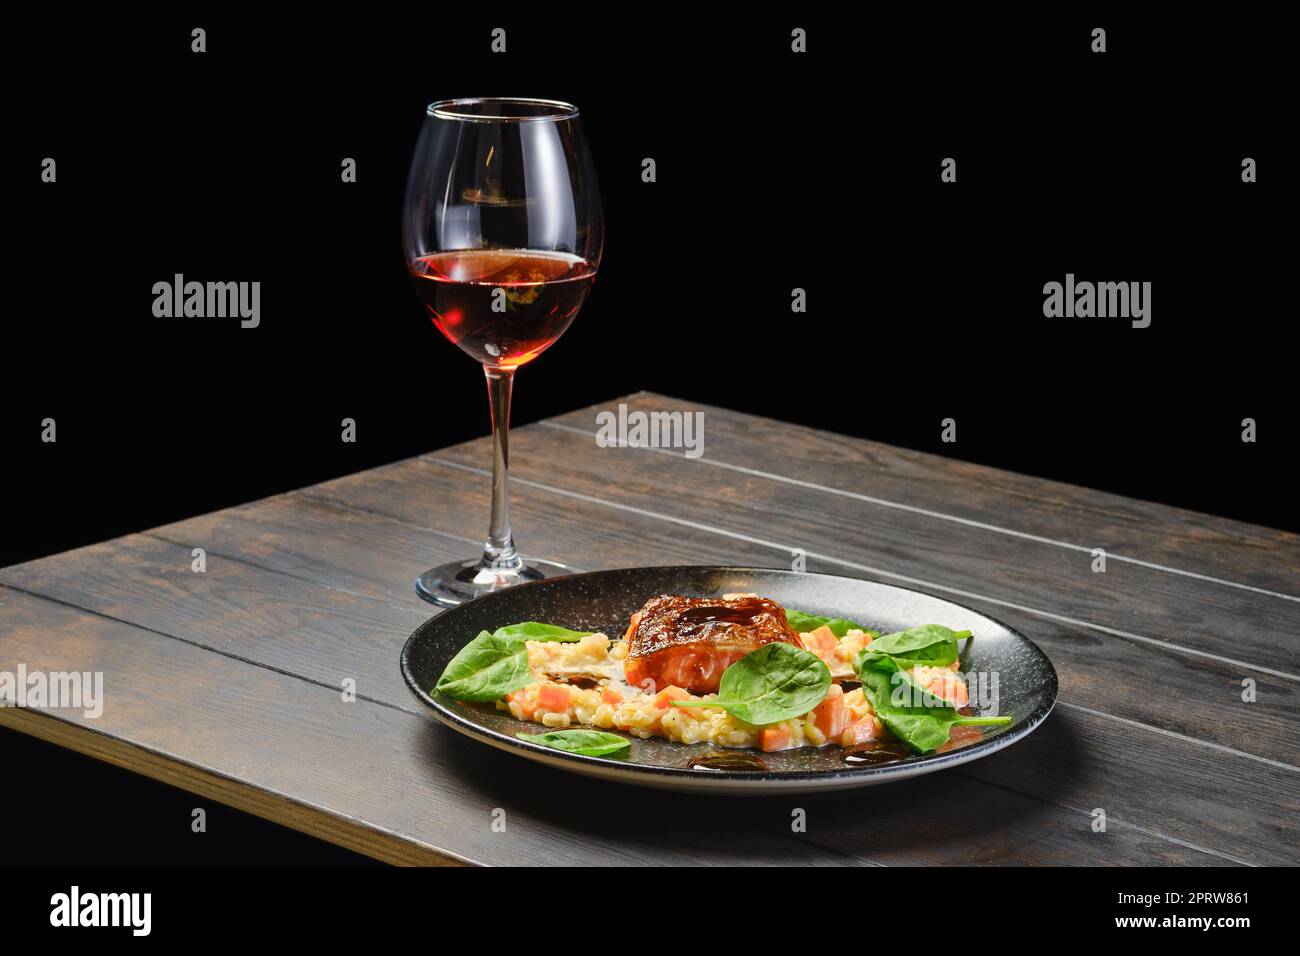 Roasted salmon fillet with bulgur with glass of rose wine Stock Photo